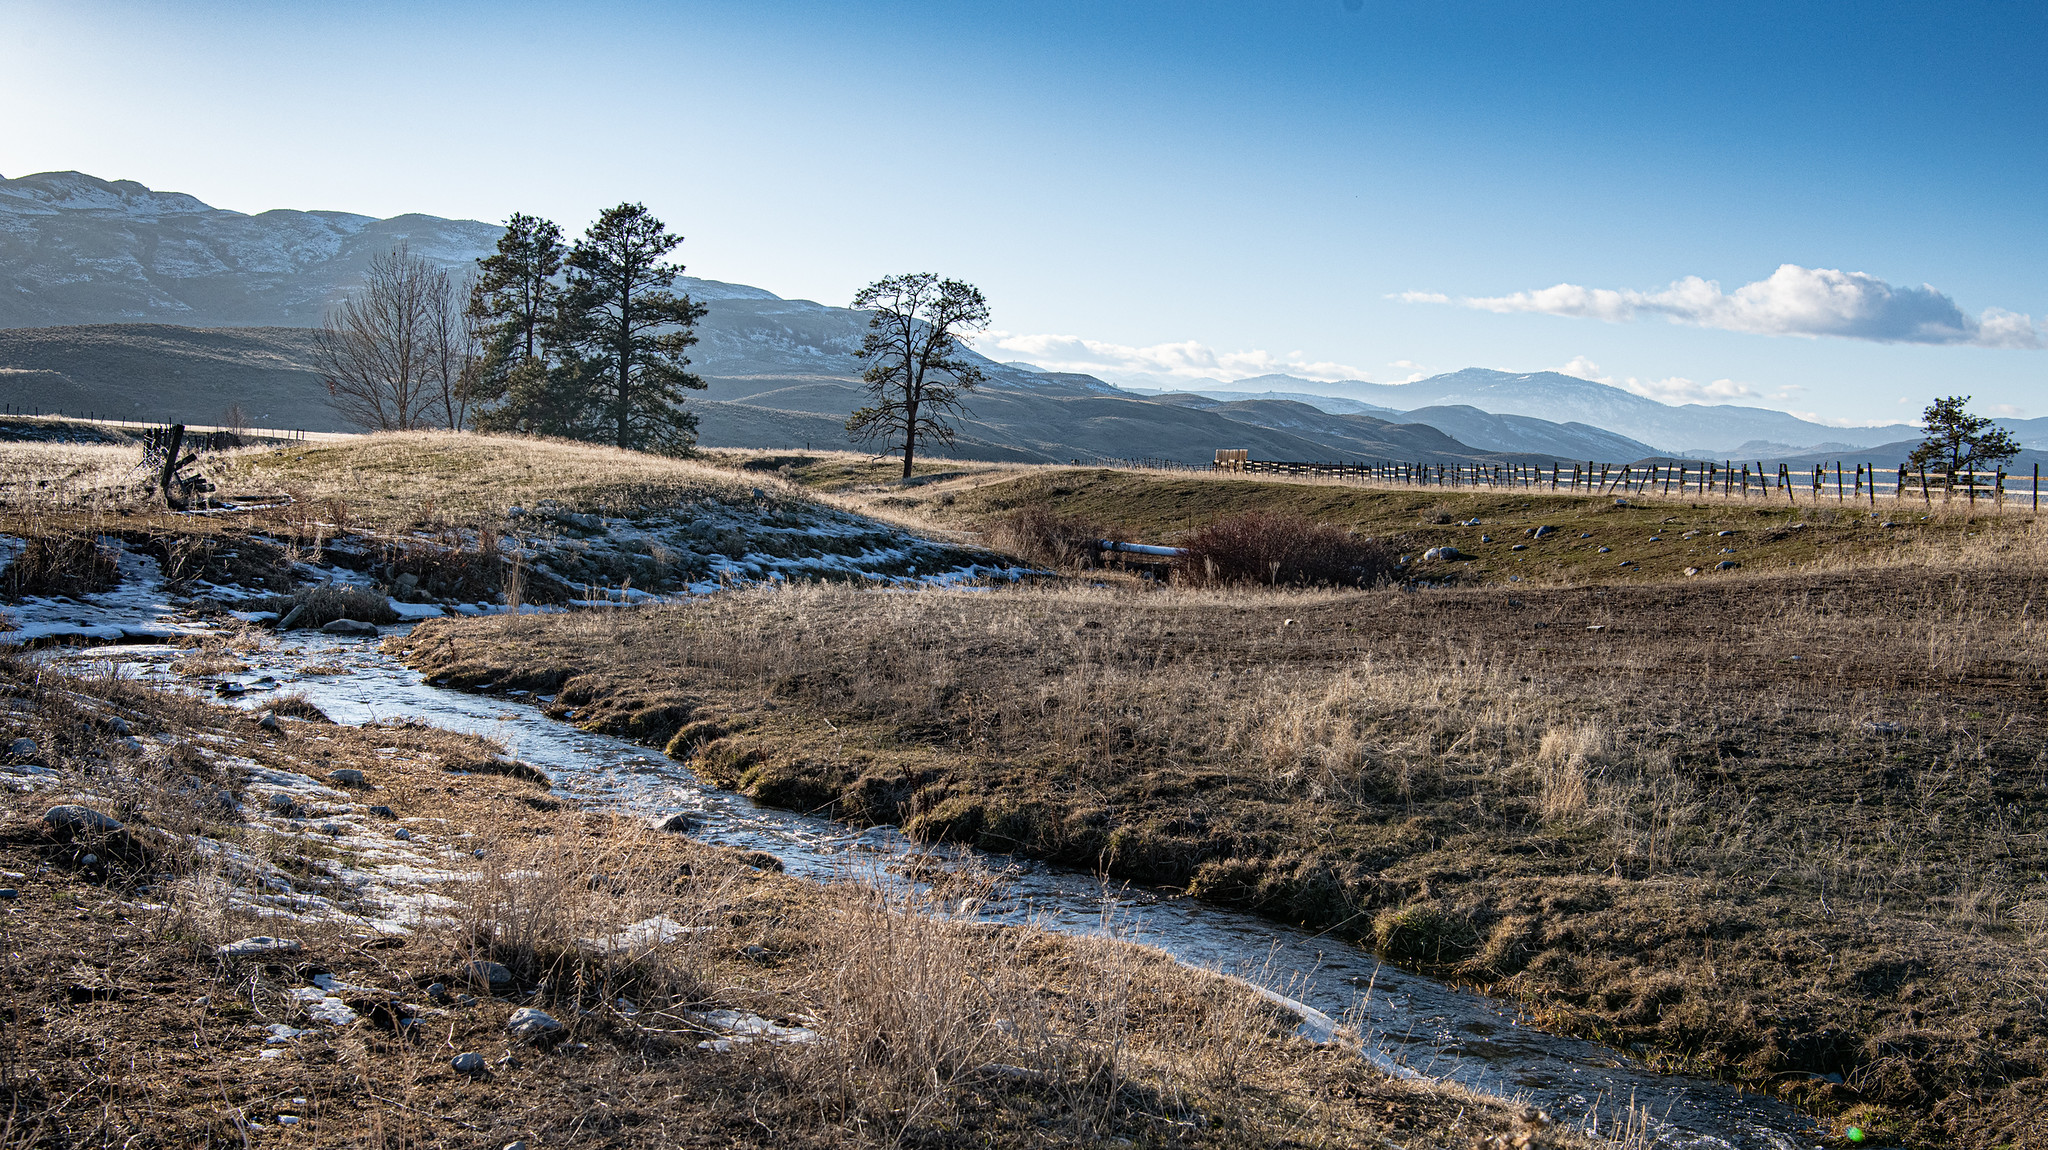 Wintery view of grasslands and Antoine Creek, a tributary of the Okanogan River, with mountains in the background.